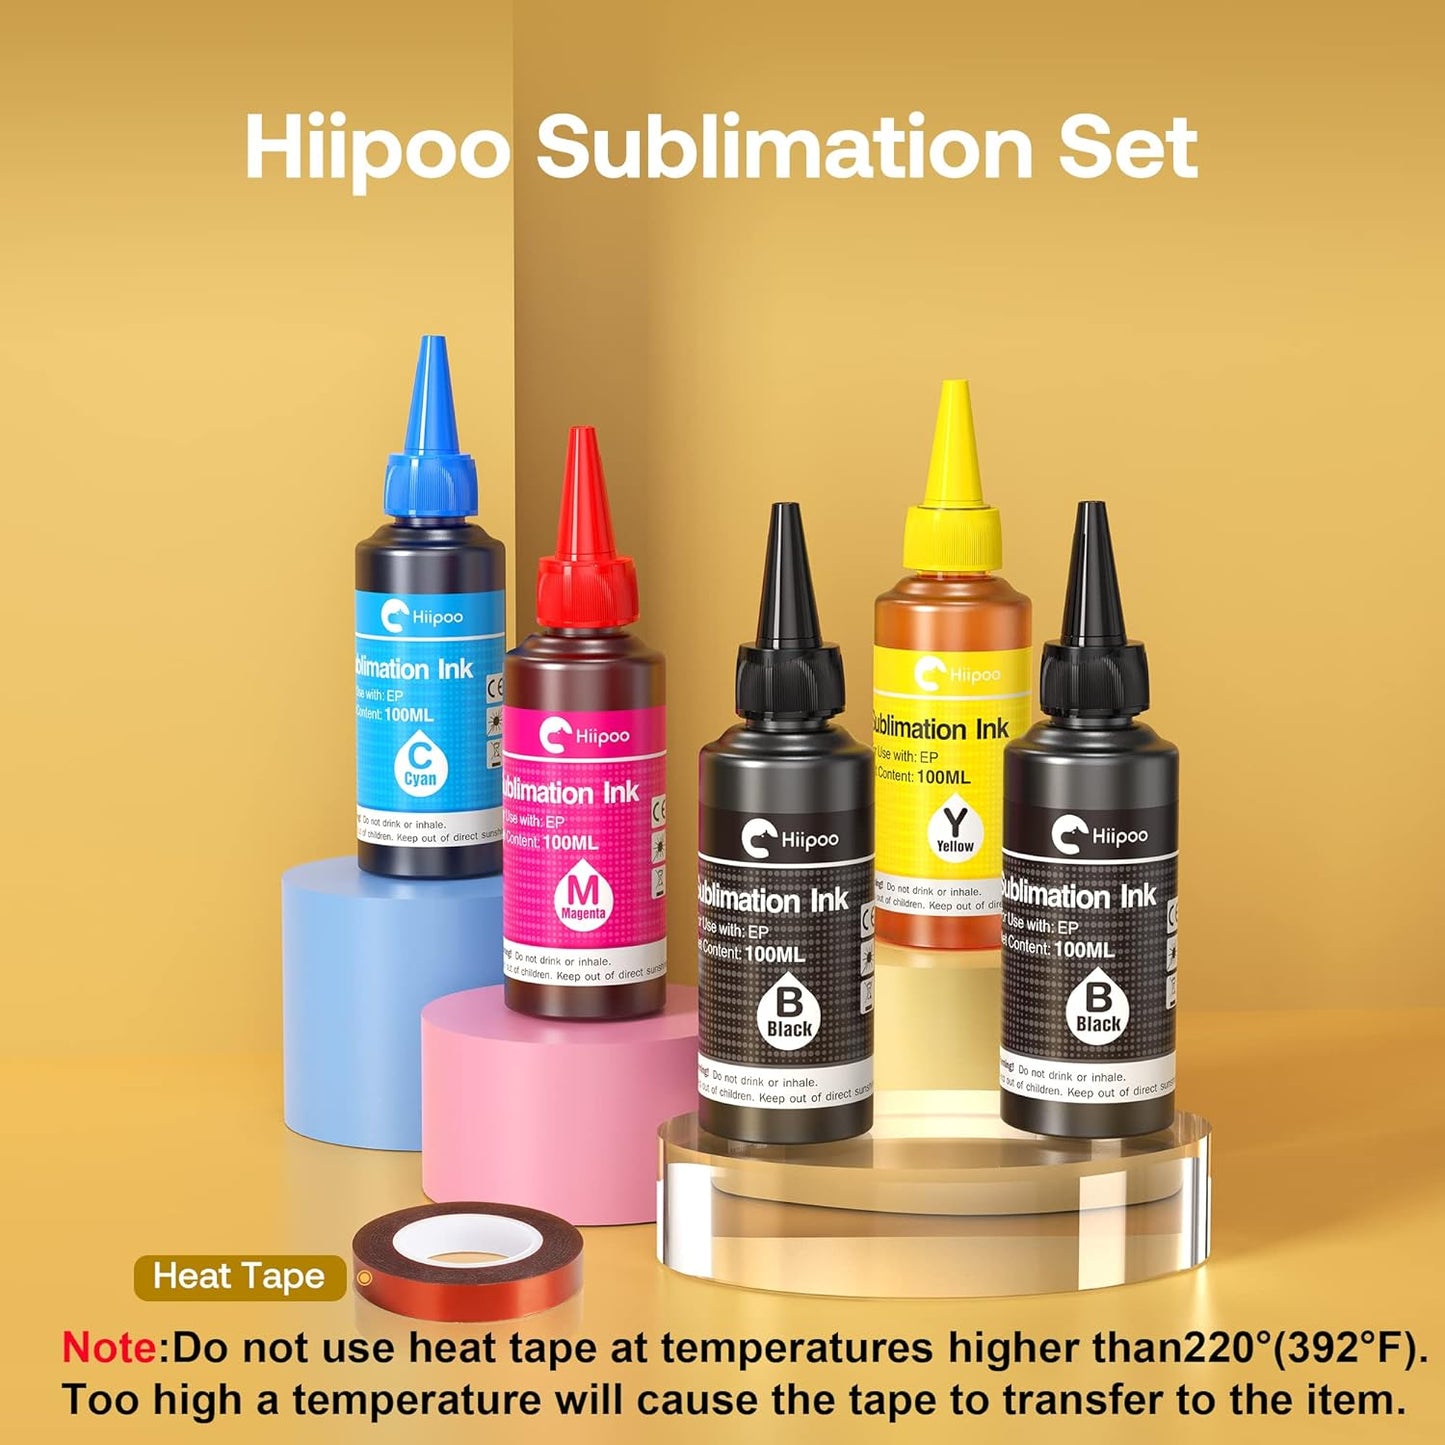 Hiipoo 500ML Sublimation Ink Refill for ET2400 ET-2720 ET-2760 ET-2800 ET-2803 ET-2850 ET-4800 ET-15000 ET-3760 Inkjet Printer Heat Press Transfer on Mugs T-Shirts Pillows (Upgrade Version)